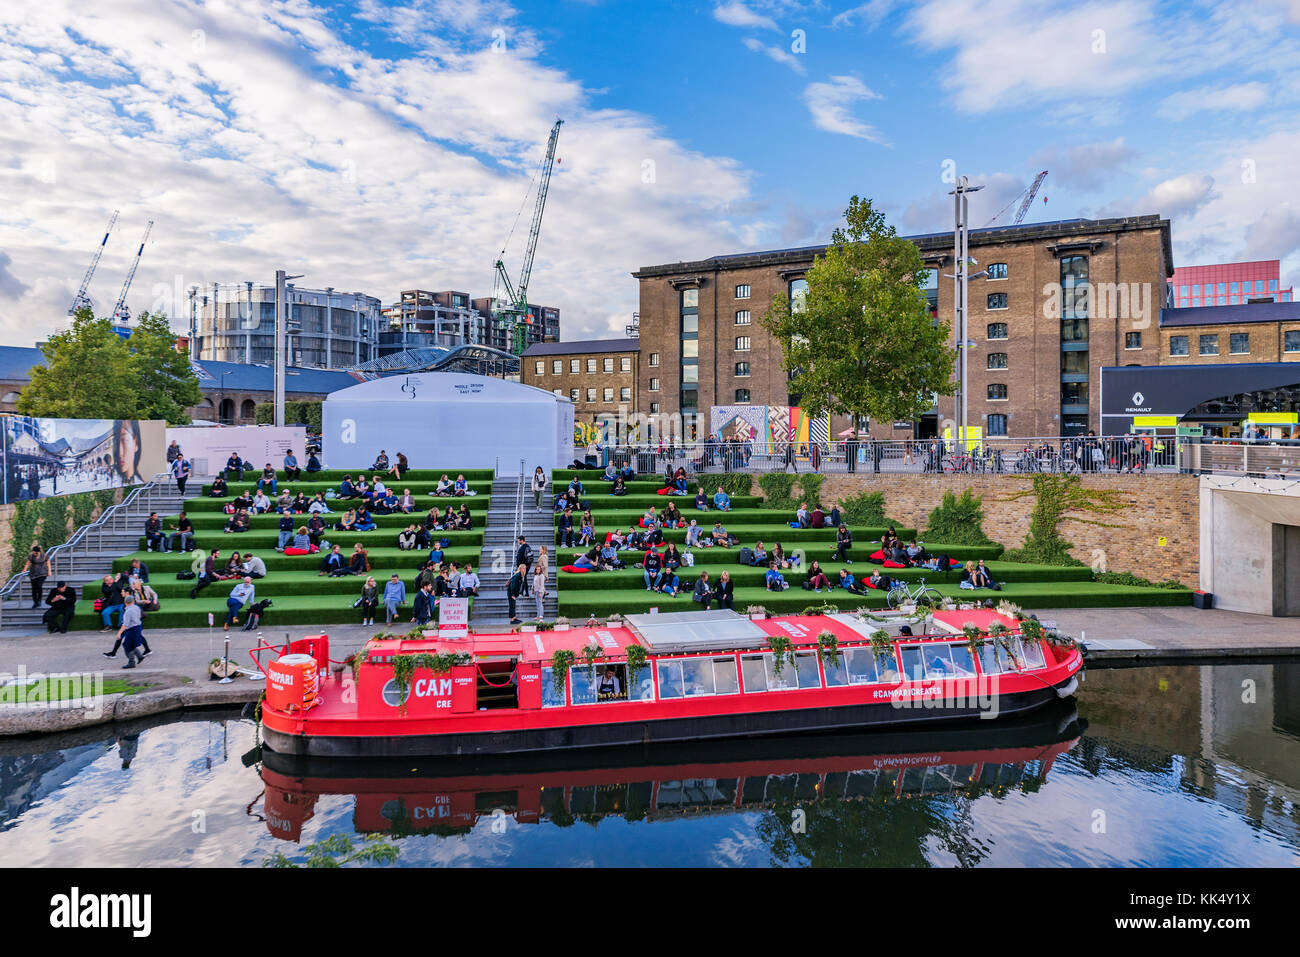 LONDON, UNITED KINGDOM - SEPTEMBER 23: This is a view of Granary Square riverside area and the Central Saint Martins university building on September  Stock Photo